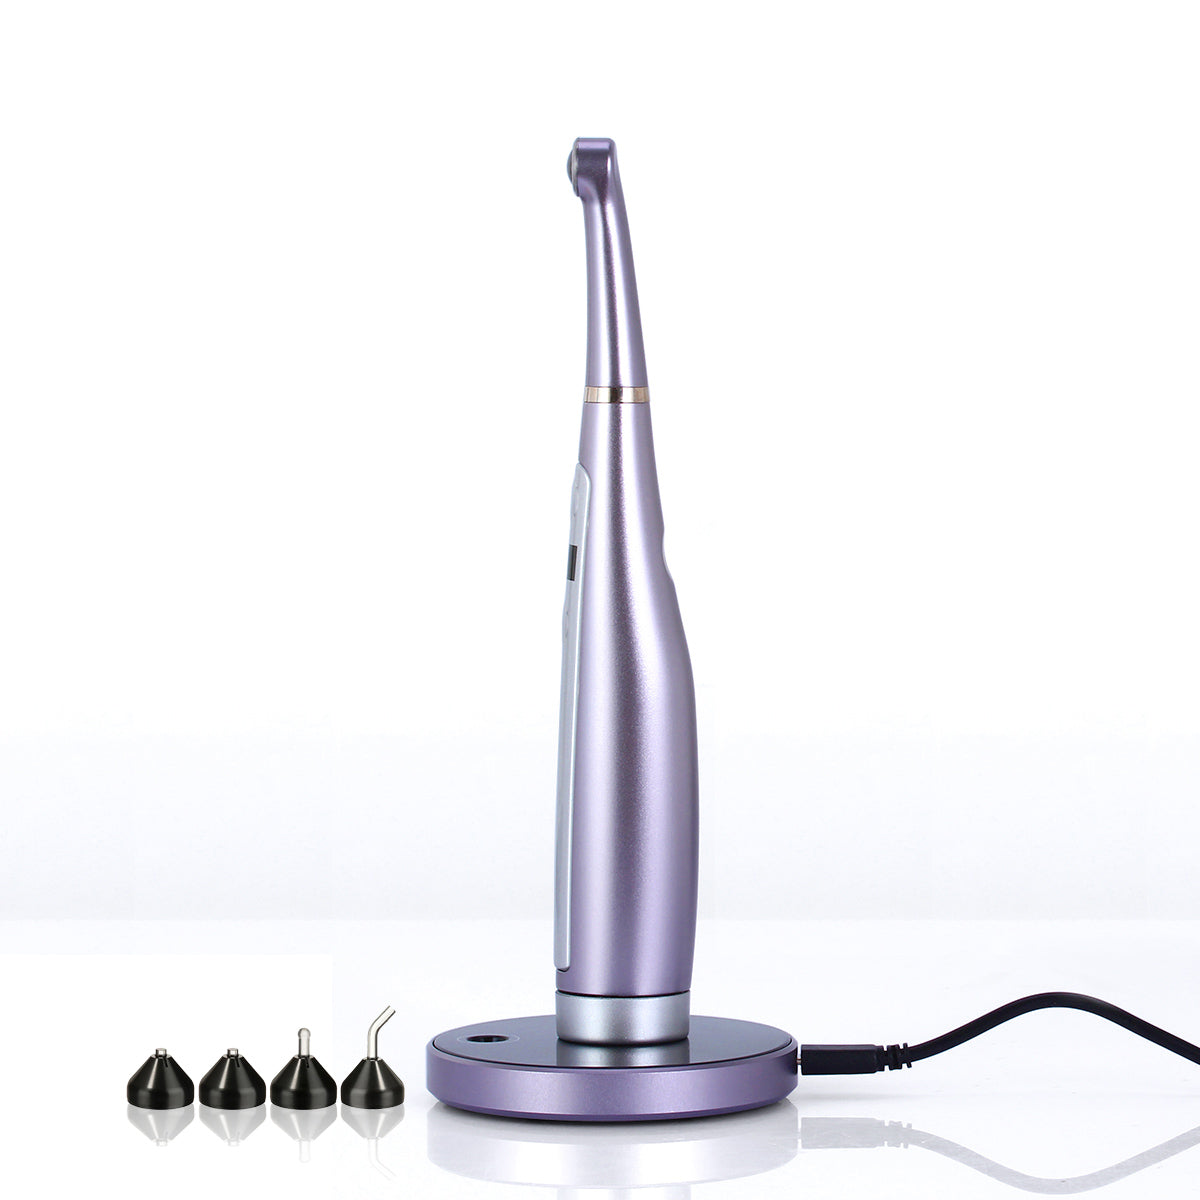 VAFU LED Curing Light Cordless OLED Screen 1 Second DeepCure Wide Specturm Metal Body With Caries Detector Light Meter 3200mW/Cm² - pairaydental.com